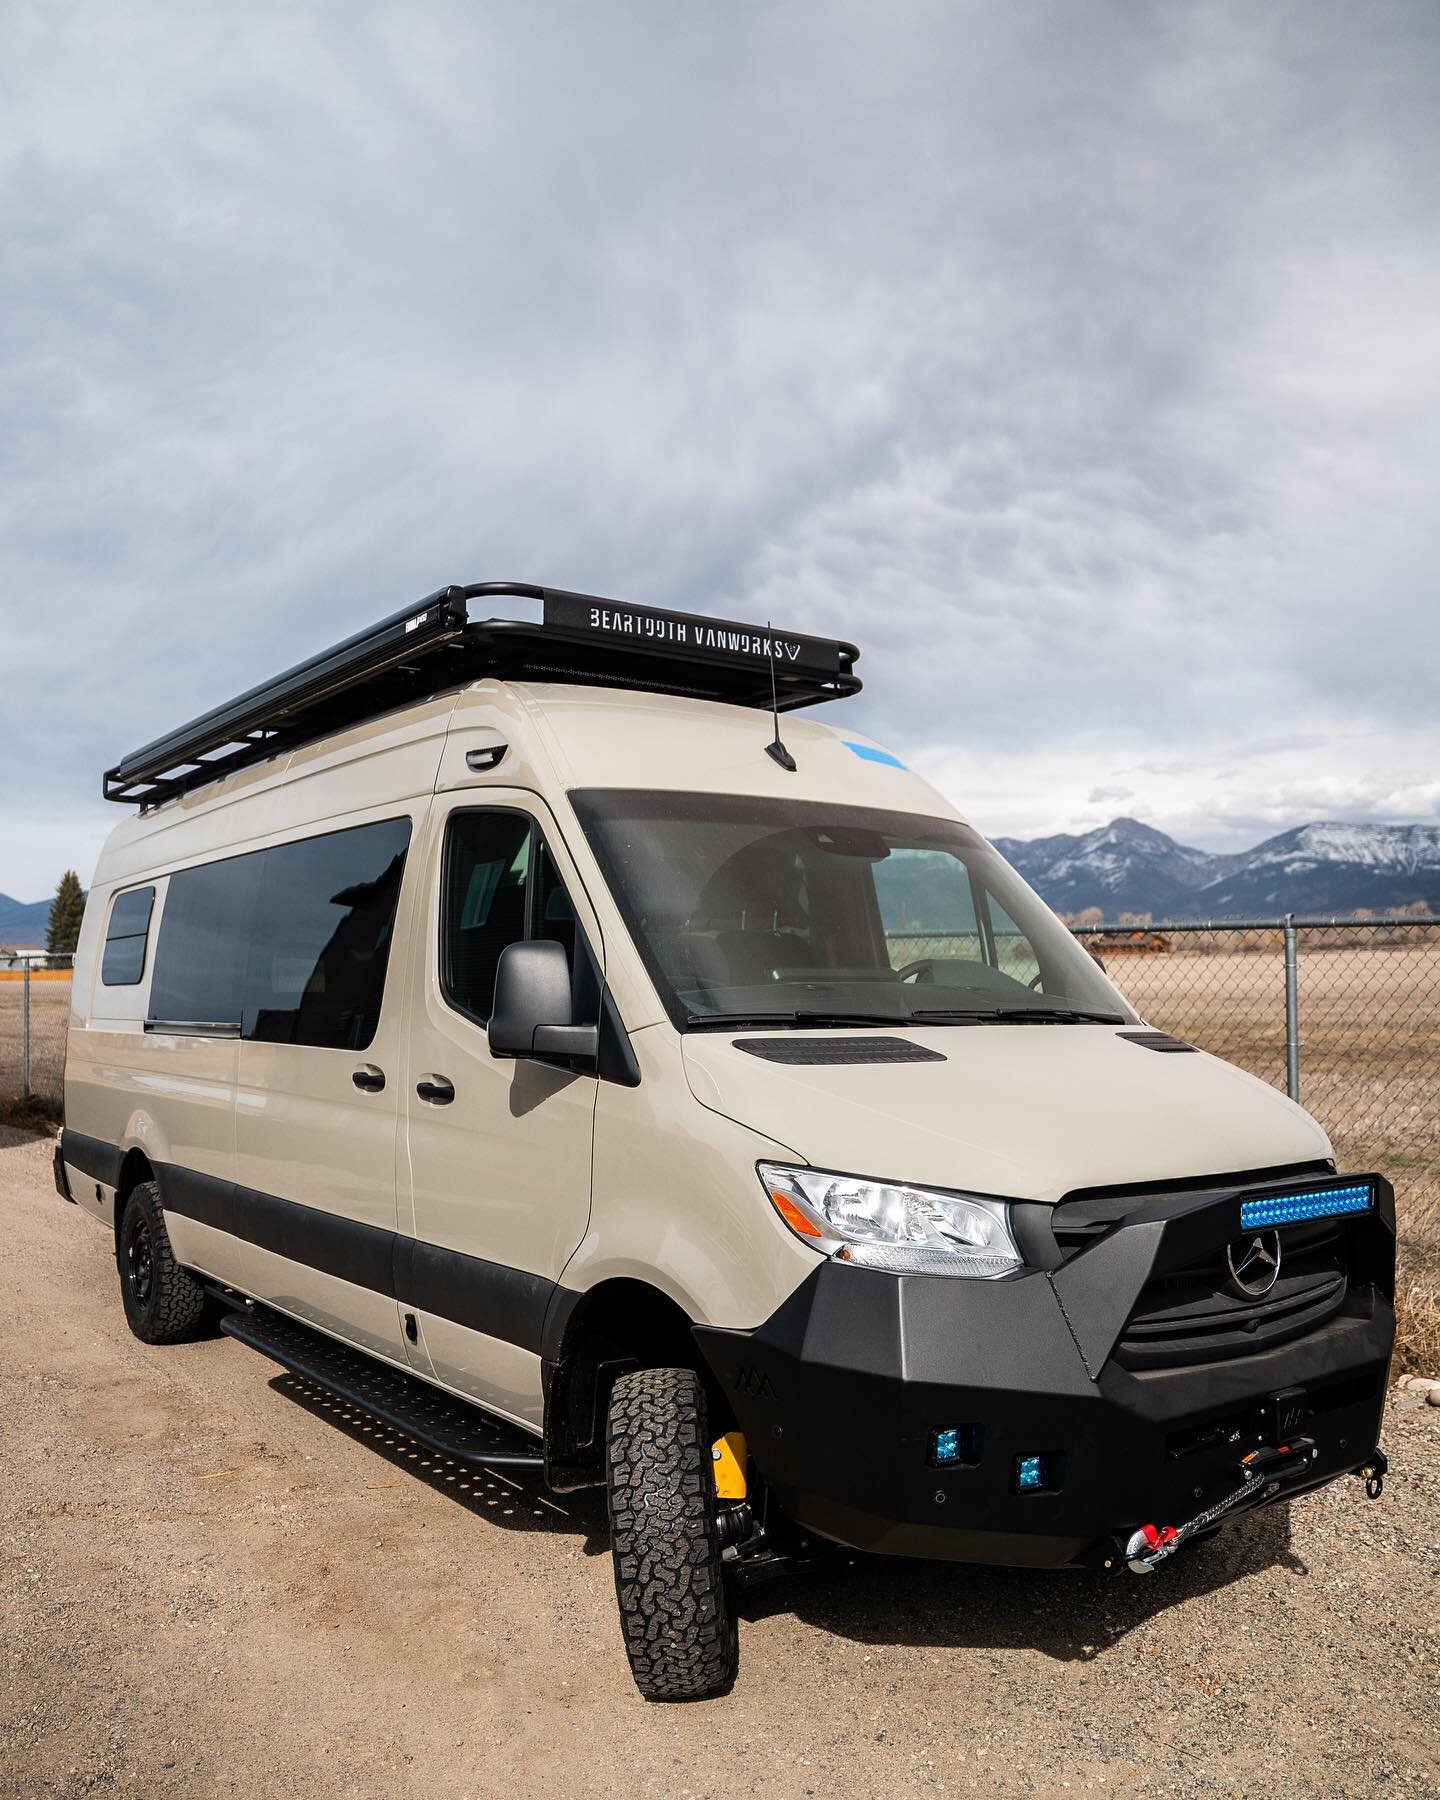 It&rsquo;s not often that we get the build on a 170EXT, but when we do, we like to go big 😏 Navigator features an expansive seating and sleeping area, as well as full kitchen, and endless amounts of storage. Step inside this beast and hit the road i